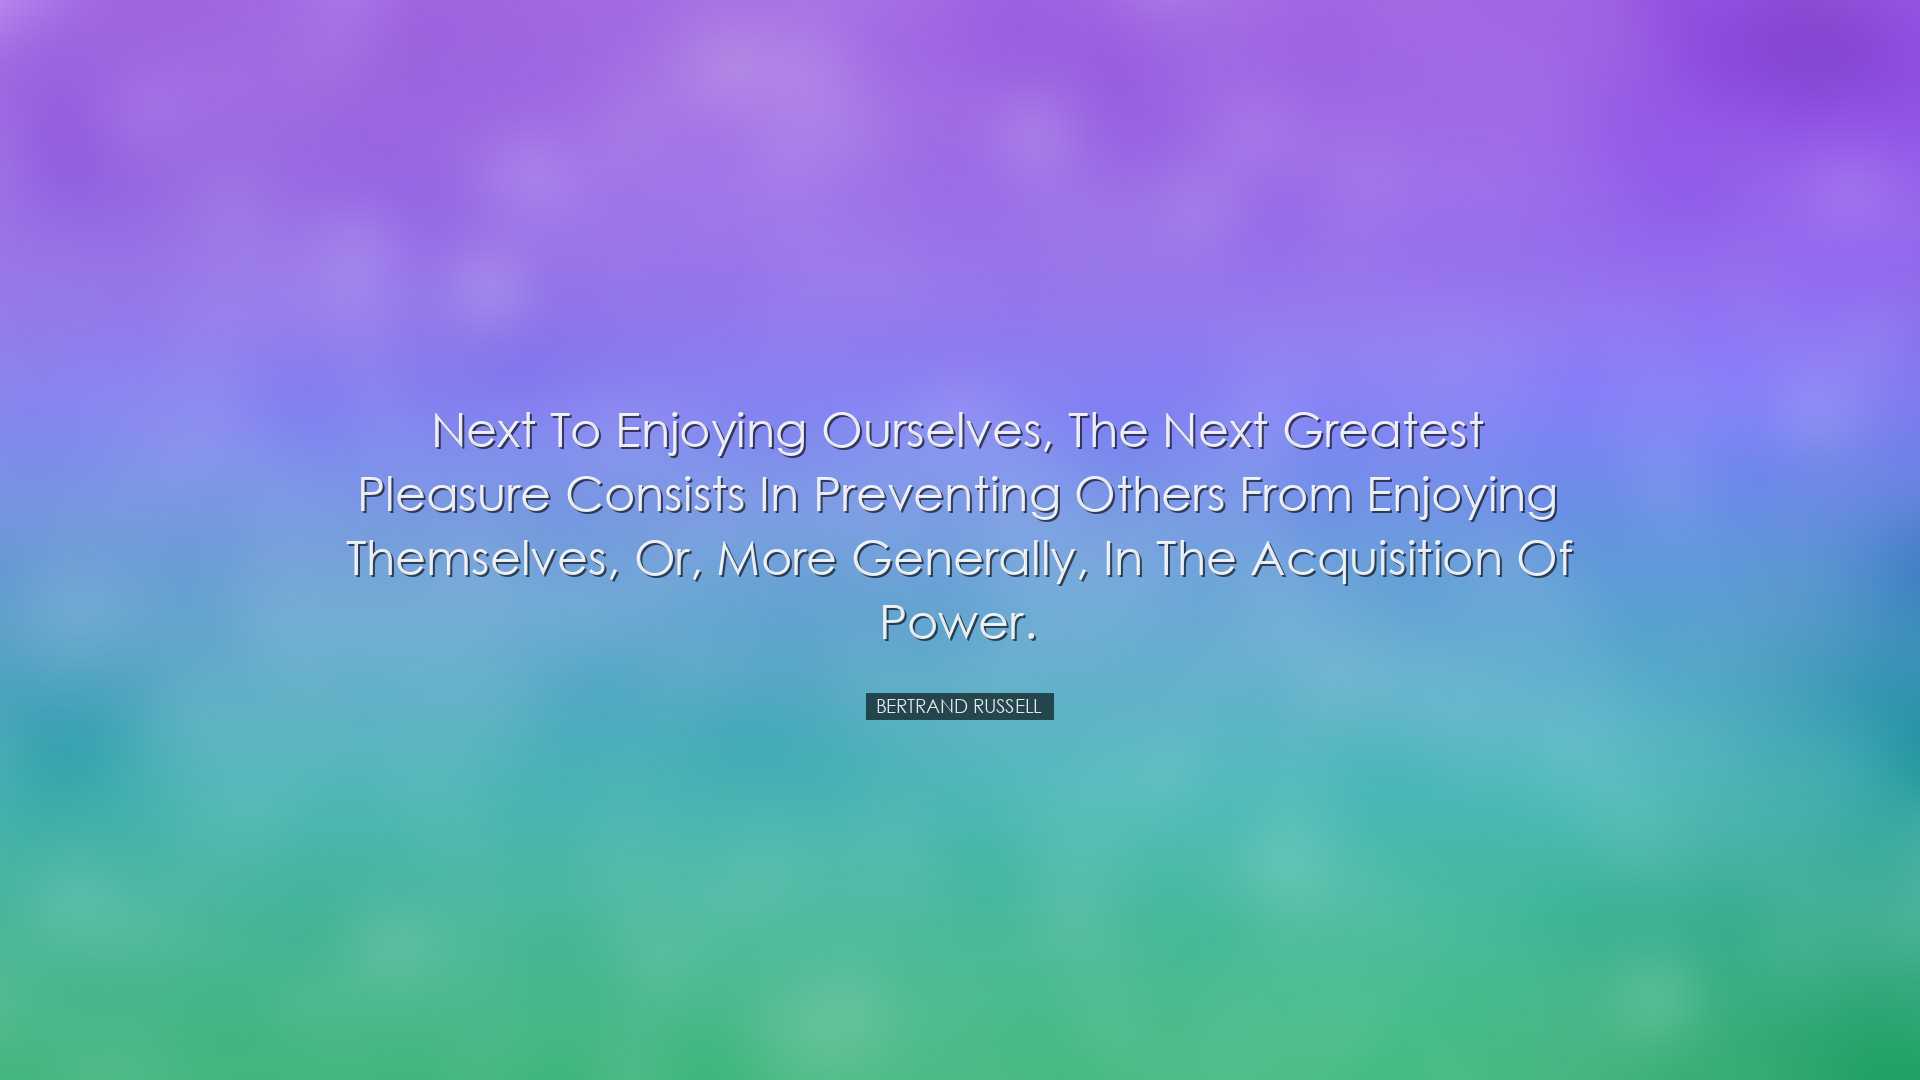 Next to enjoying ourselves, the next greatest pleasure consists in